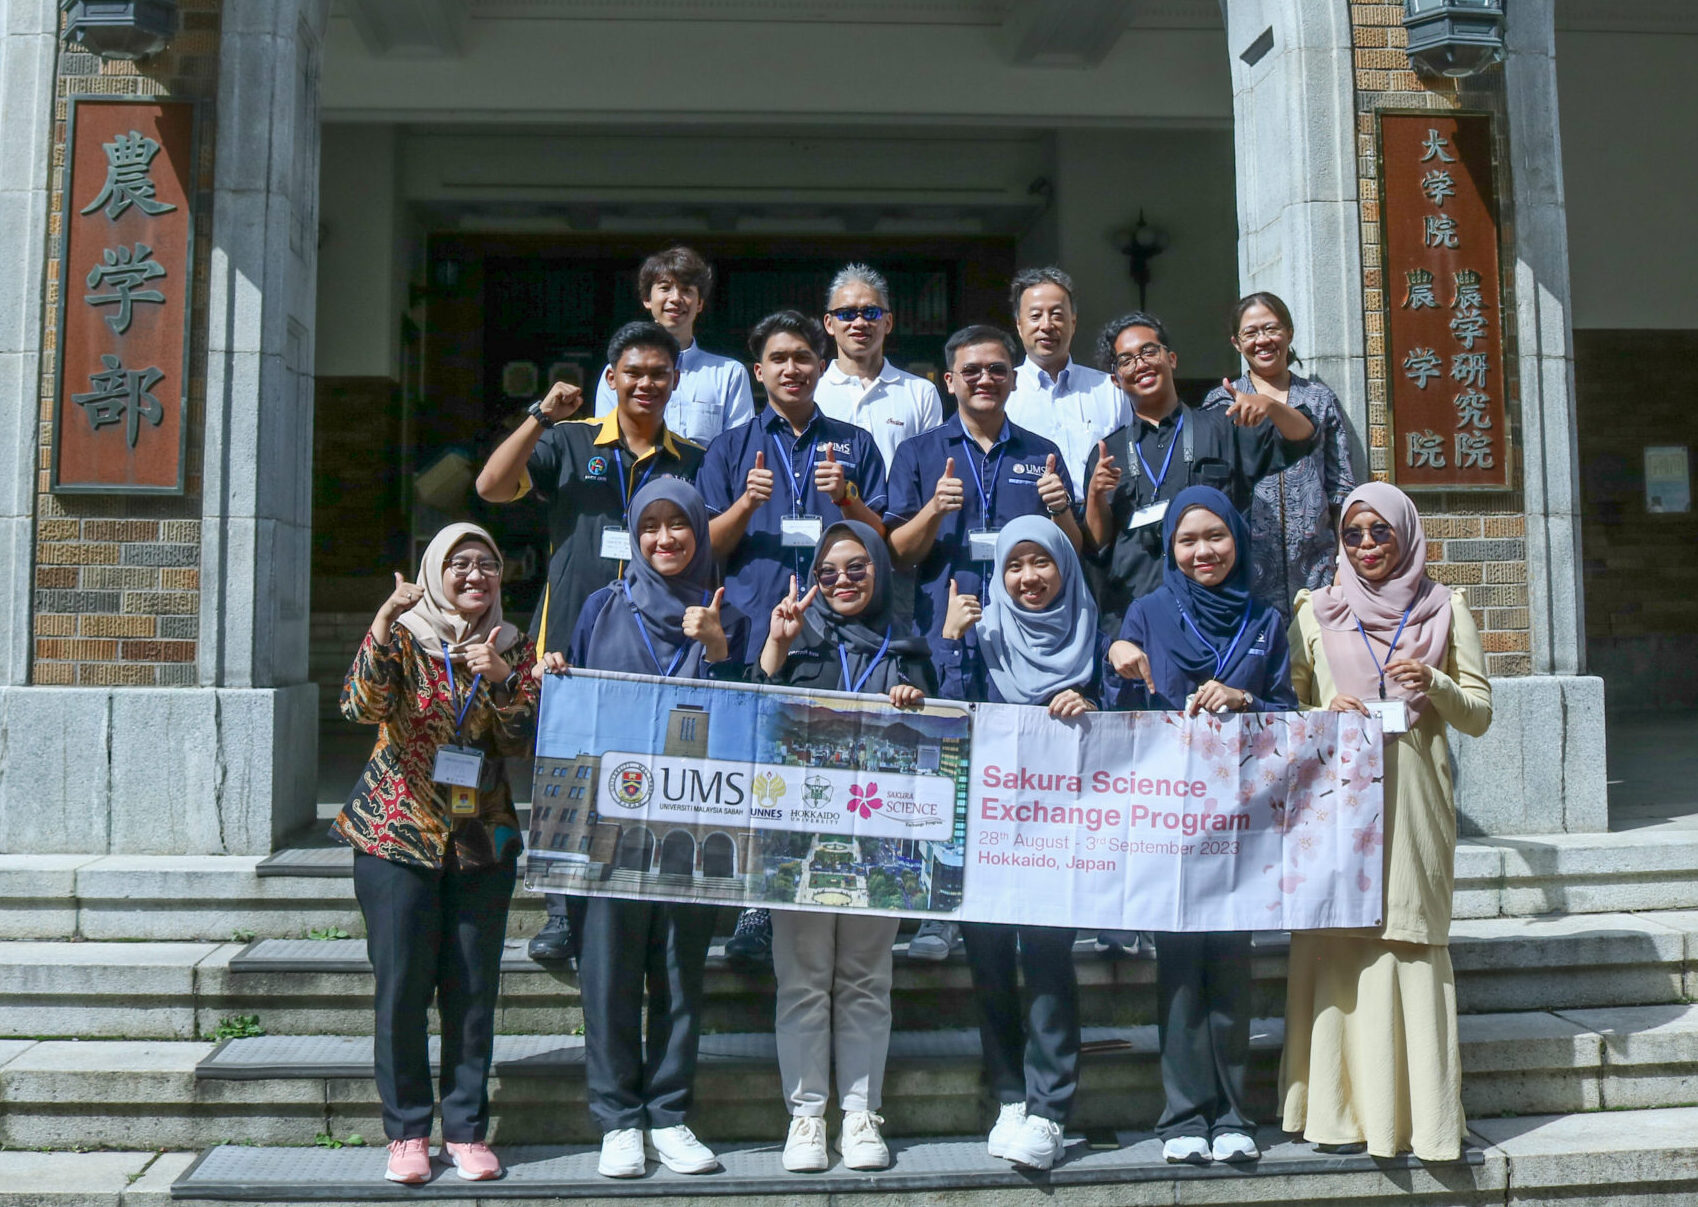 Participants and lecturers for the Sakura Science at the School of Agriculture are standing in front of the School of Agriculture's building's entrance, posing for the picture. The people on the front row are holding a banner of the program.